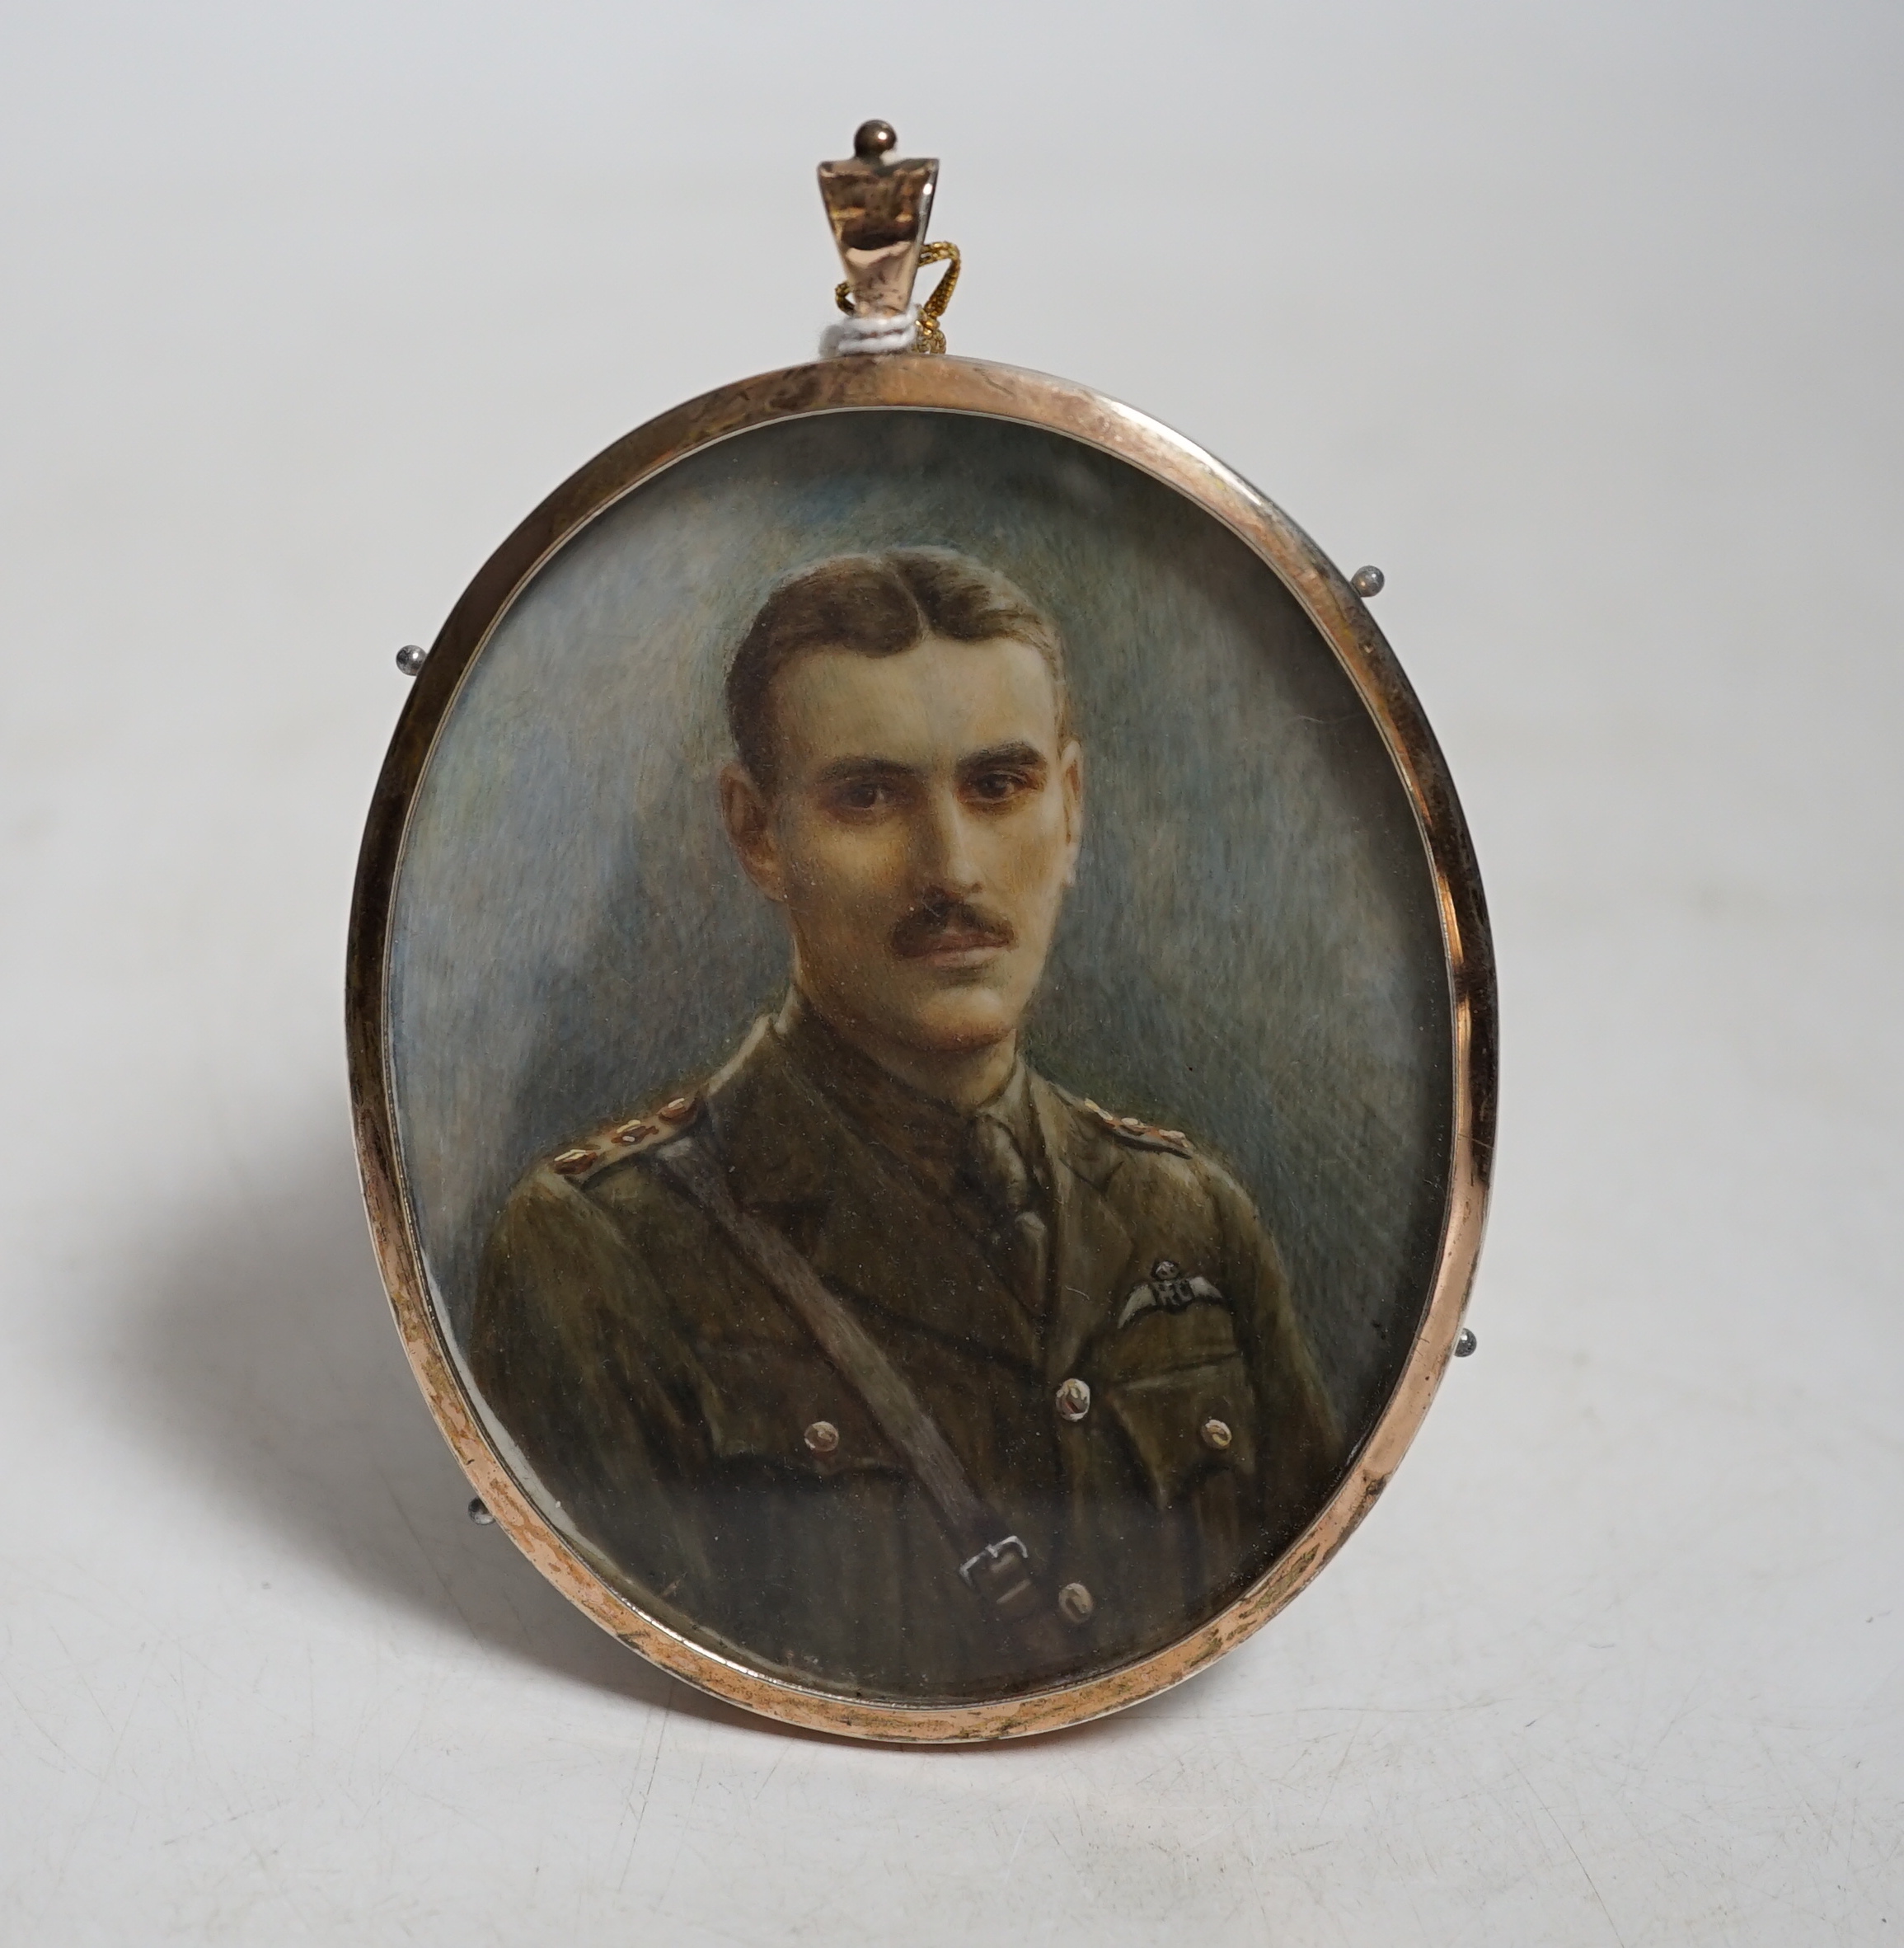 Miniature watercolour portrait on ivory of RFC officer Tom Abbot wearing military dress, with photograph of the sitter CITES Submission reference TPFS3A7Q